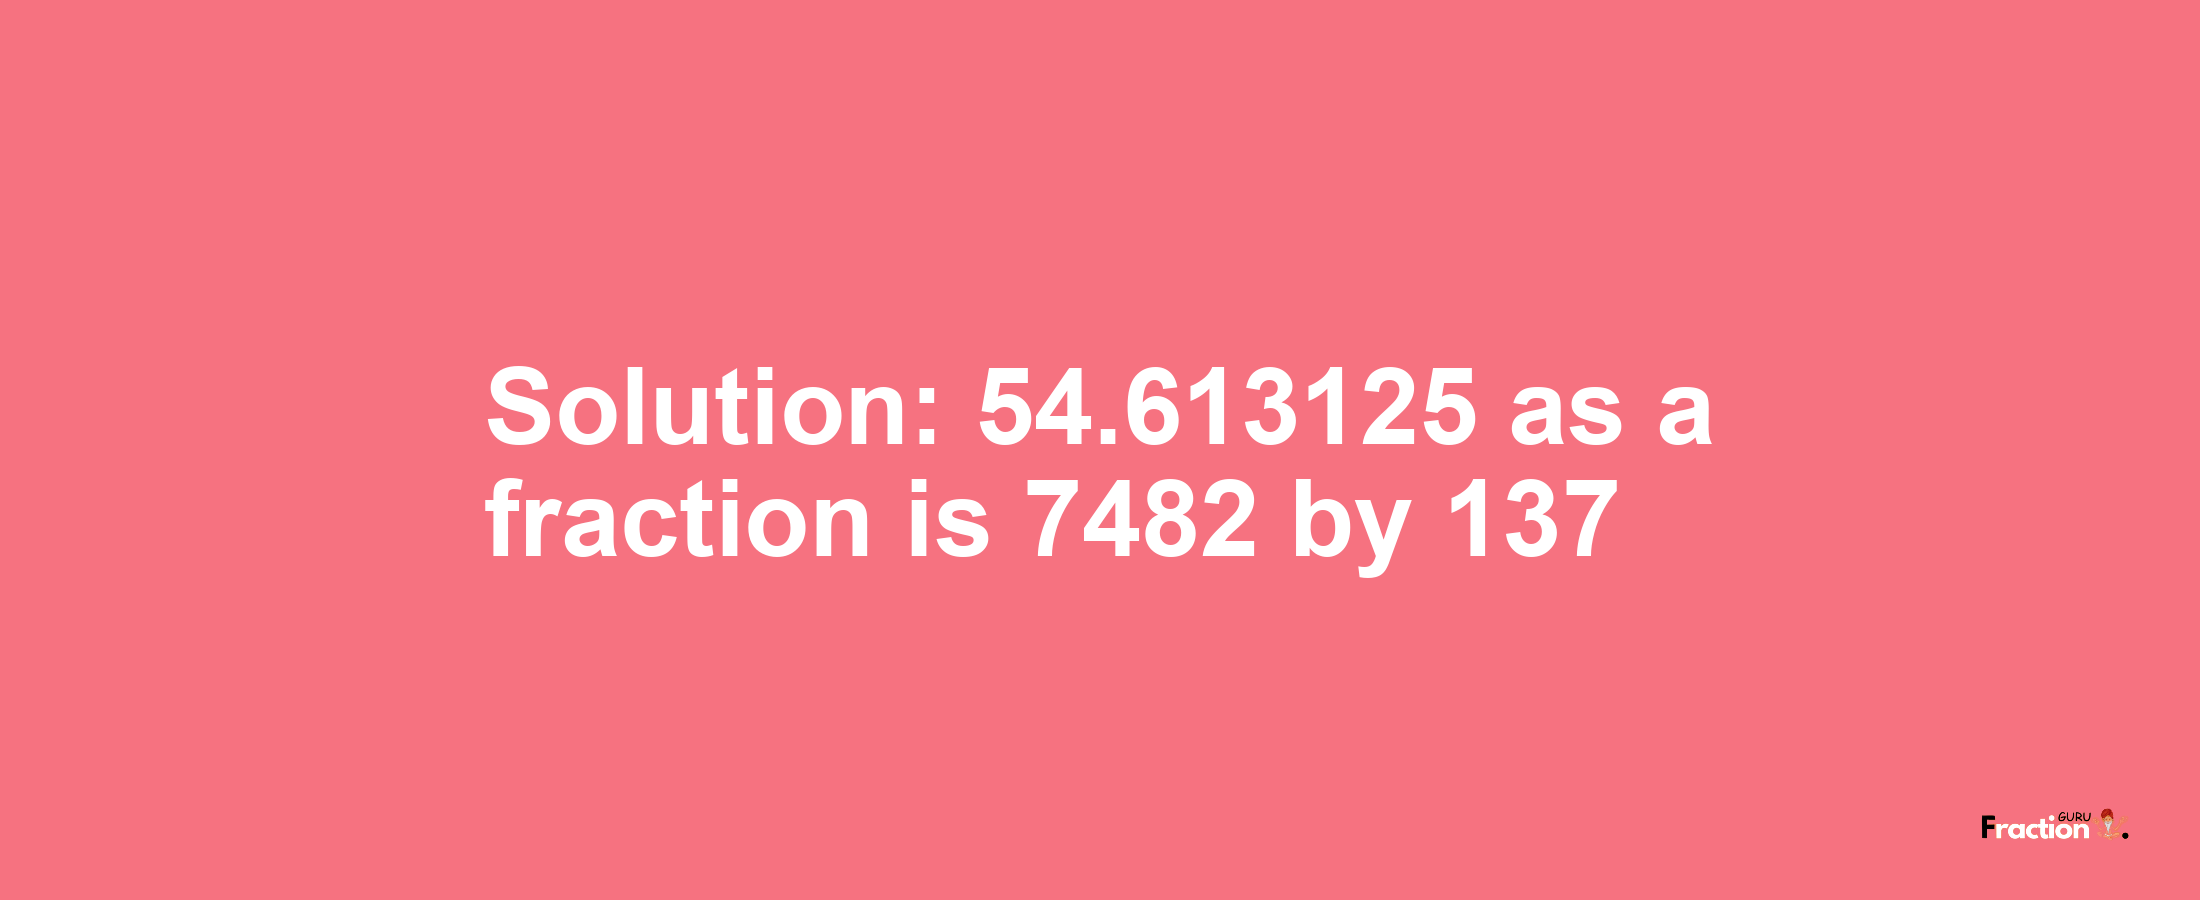 Solution:54.613125 as a fraction is 7482/137